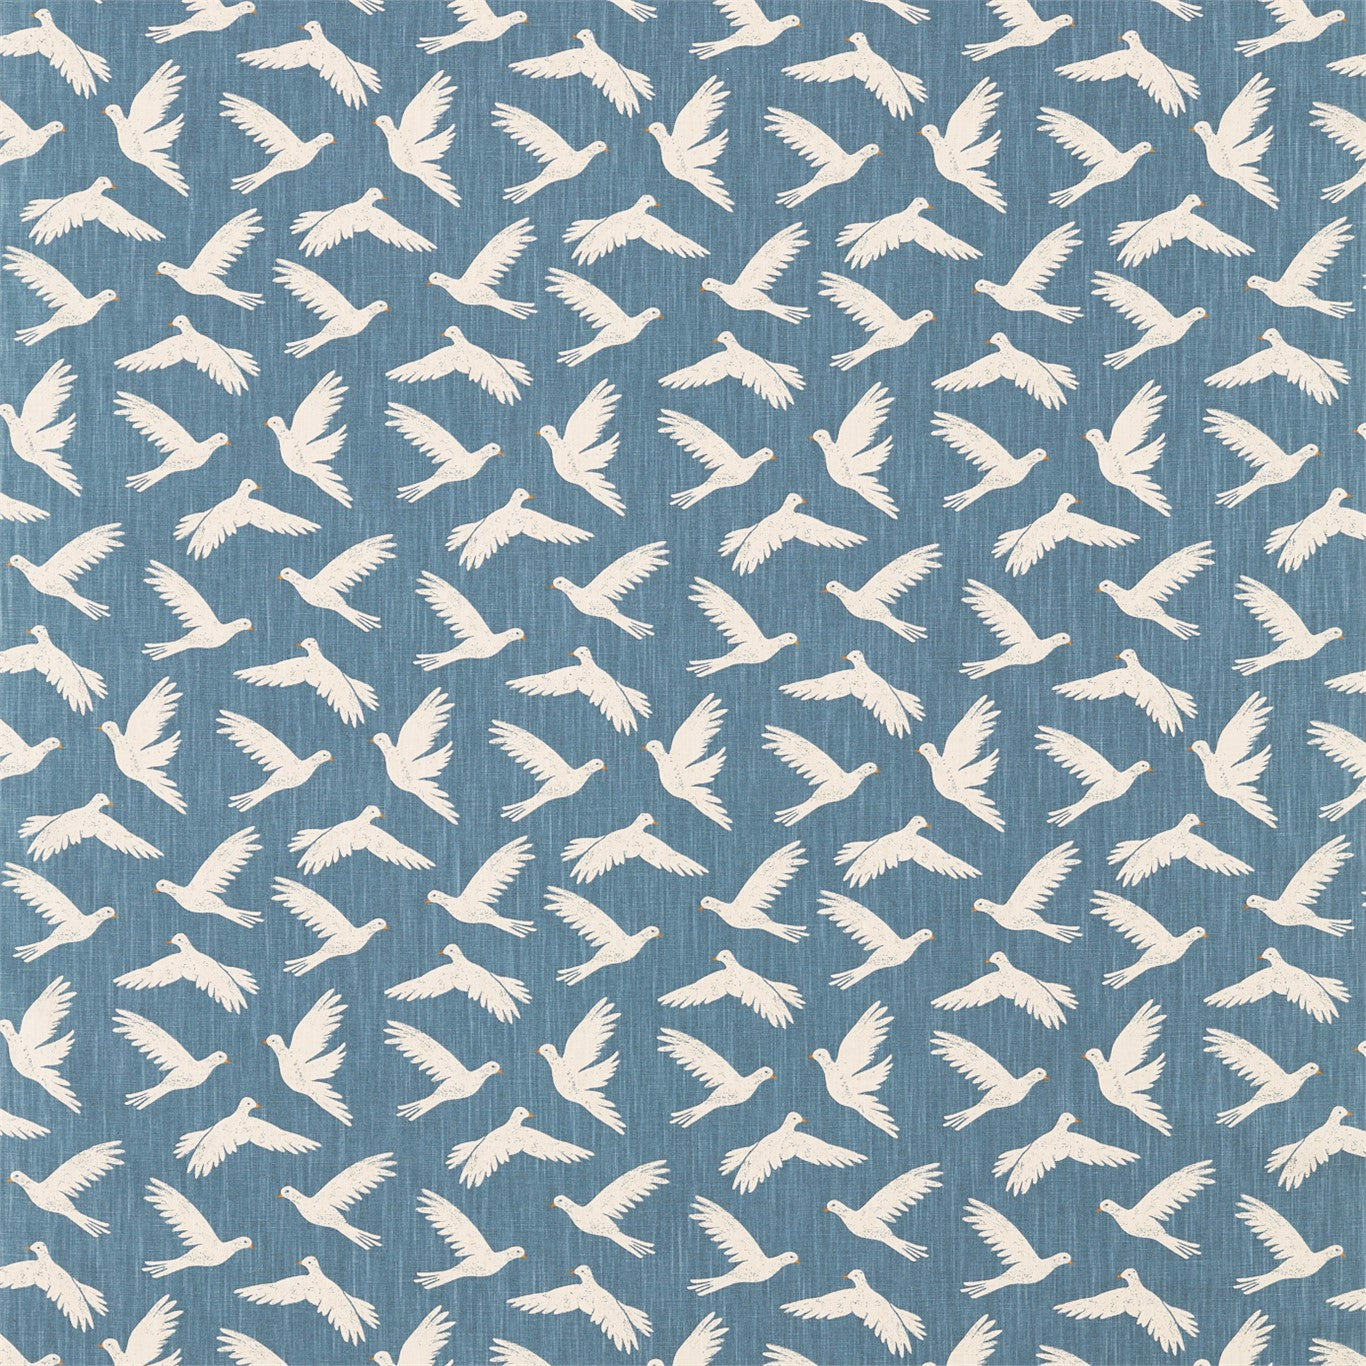 Paper Doves Fabric by Sanderson Home